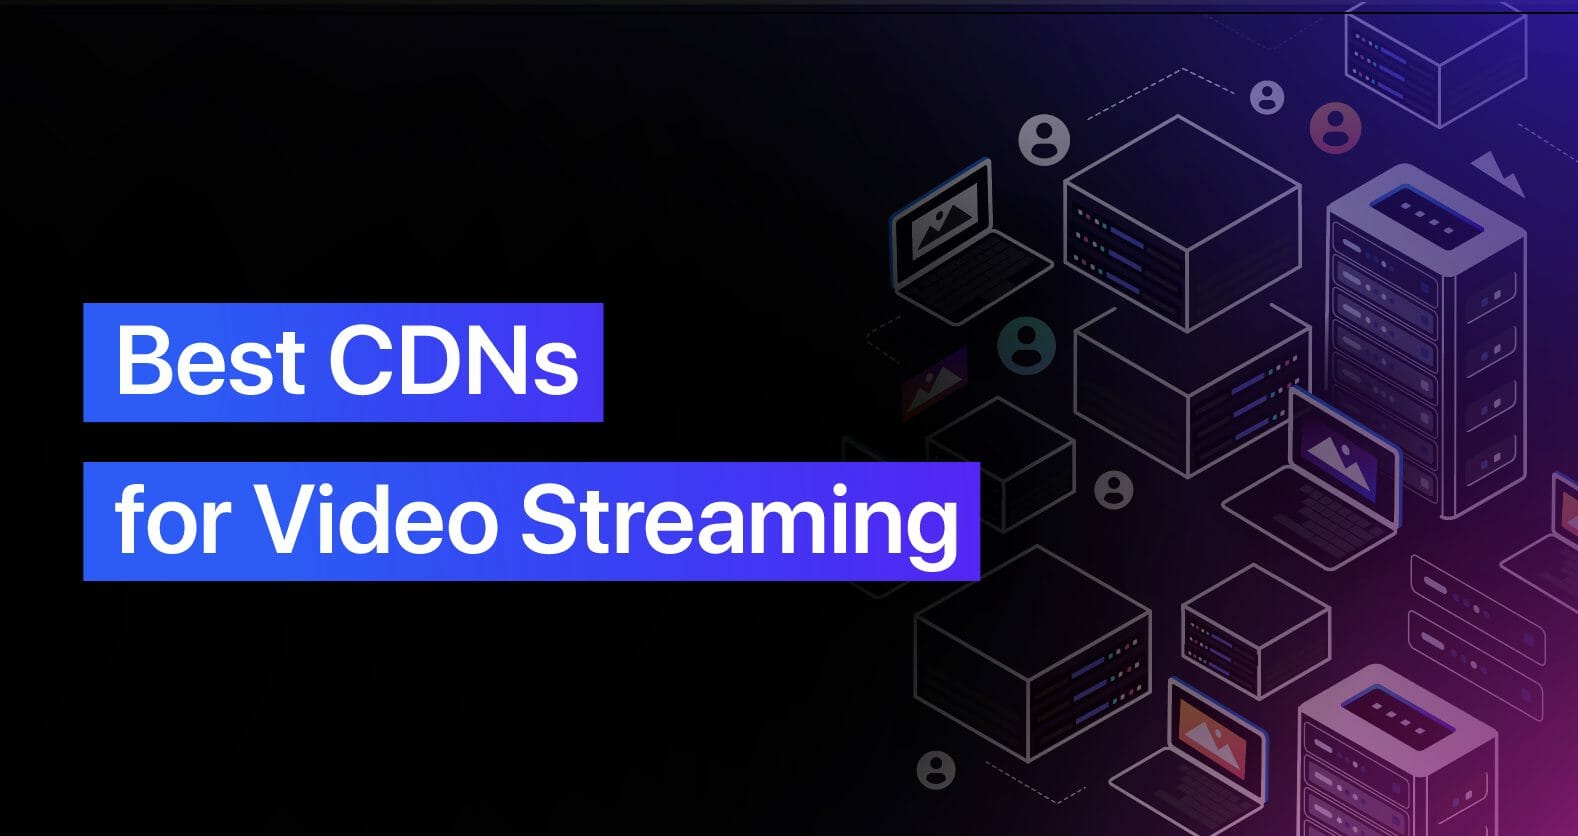 Best CDNs for Video Streaming: Which One Is Right for You?